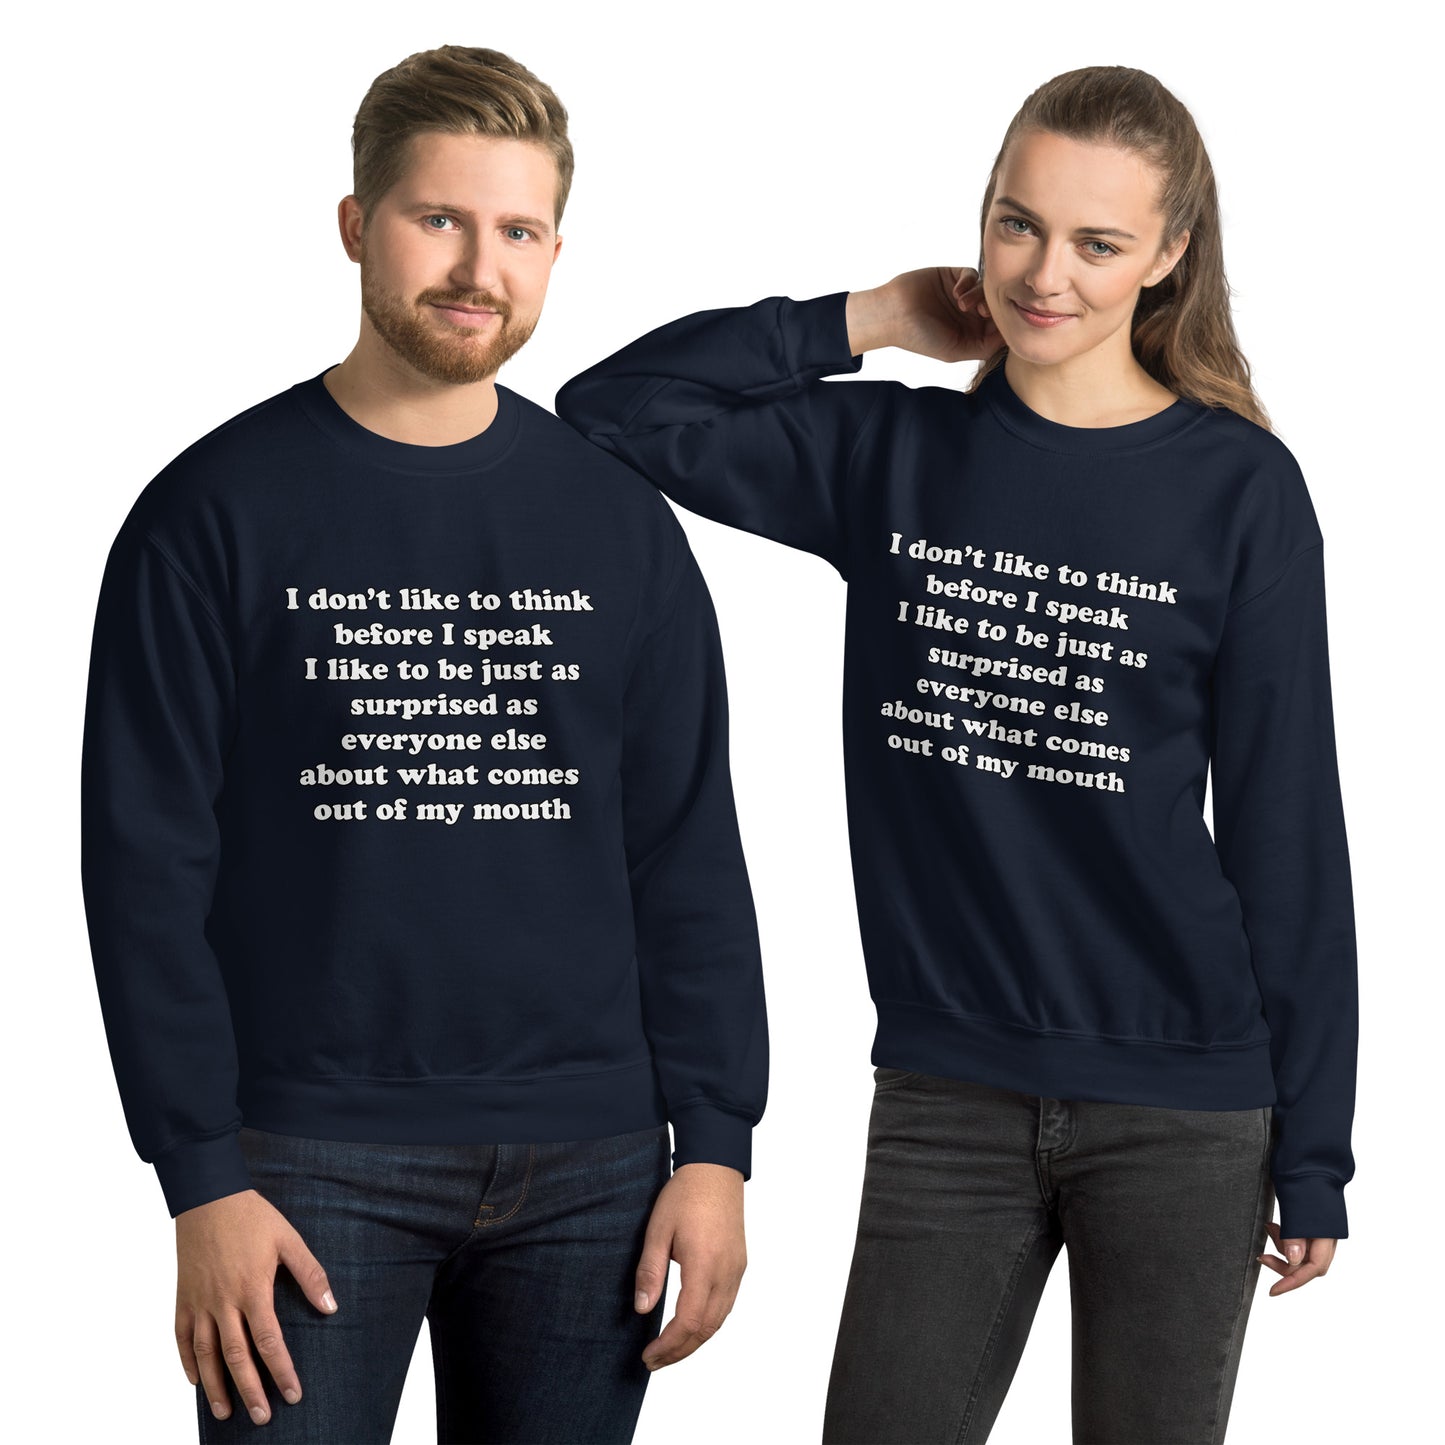 Man and woman with navy blue sweatshirt with text “I don't think before I speak Just as serprised as everyone about what comes out of my mouth"